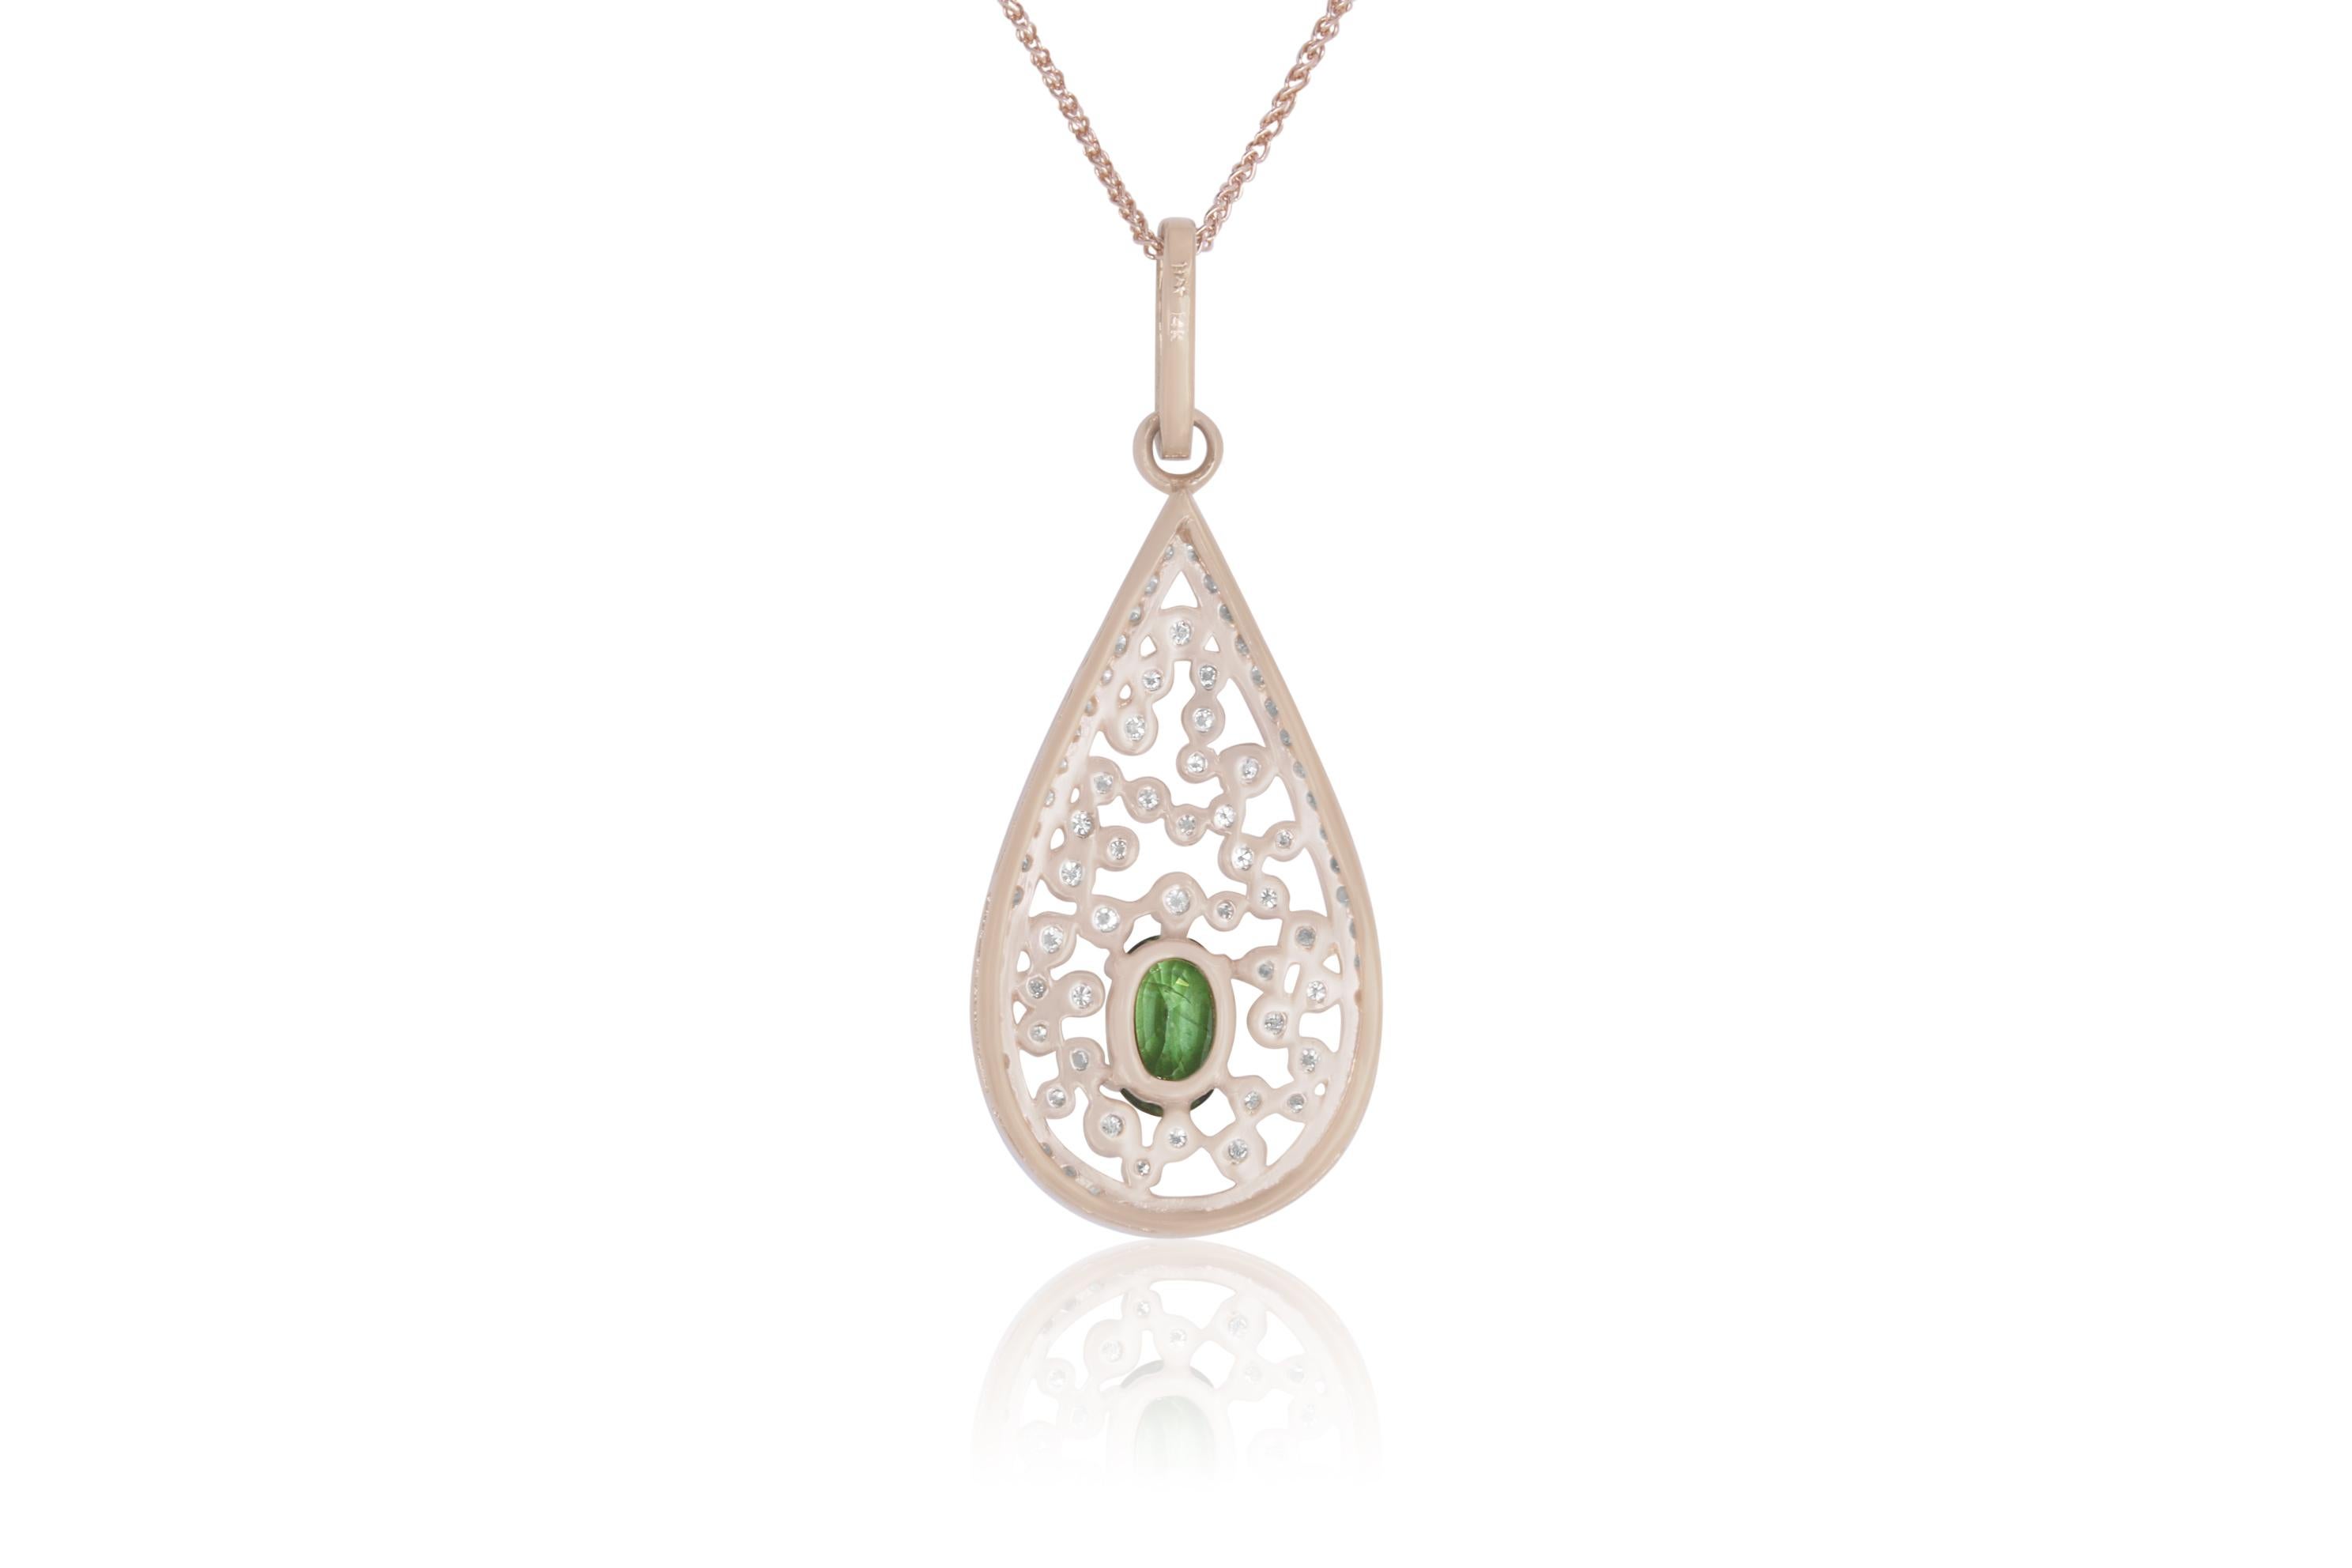 This stunning Teardrop pendant features an Oval Color Changing Alexandrite stone accompanied by 1.08 Carats of dazzling white diamonds

Material: 14k Rose Gold 
Center Stone Details: 1.34 Carat Natural Color Changing Alexandrite 
Mounting Diamond